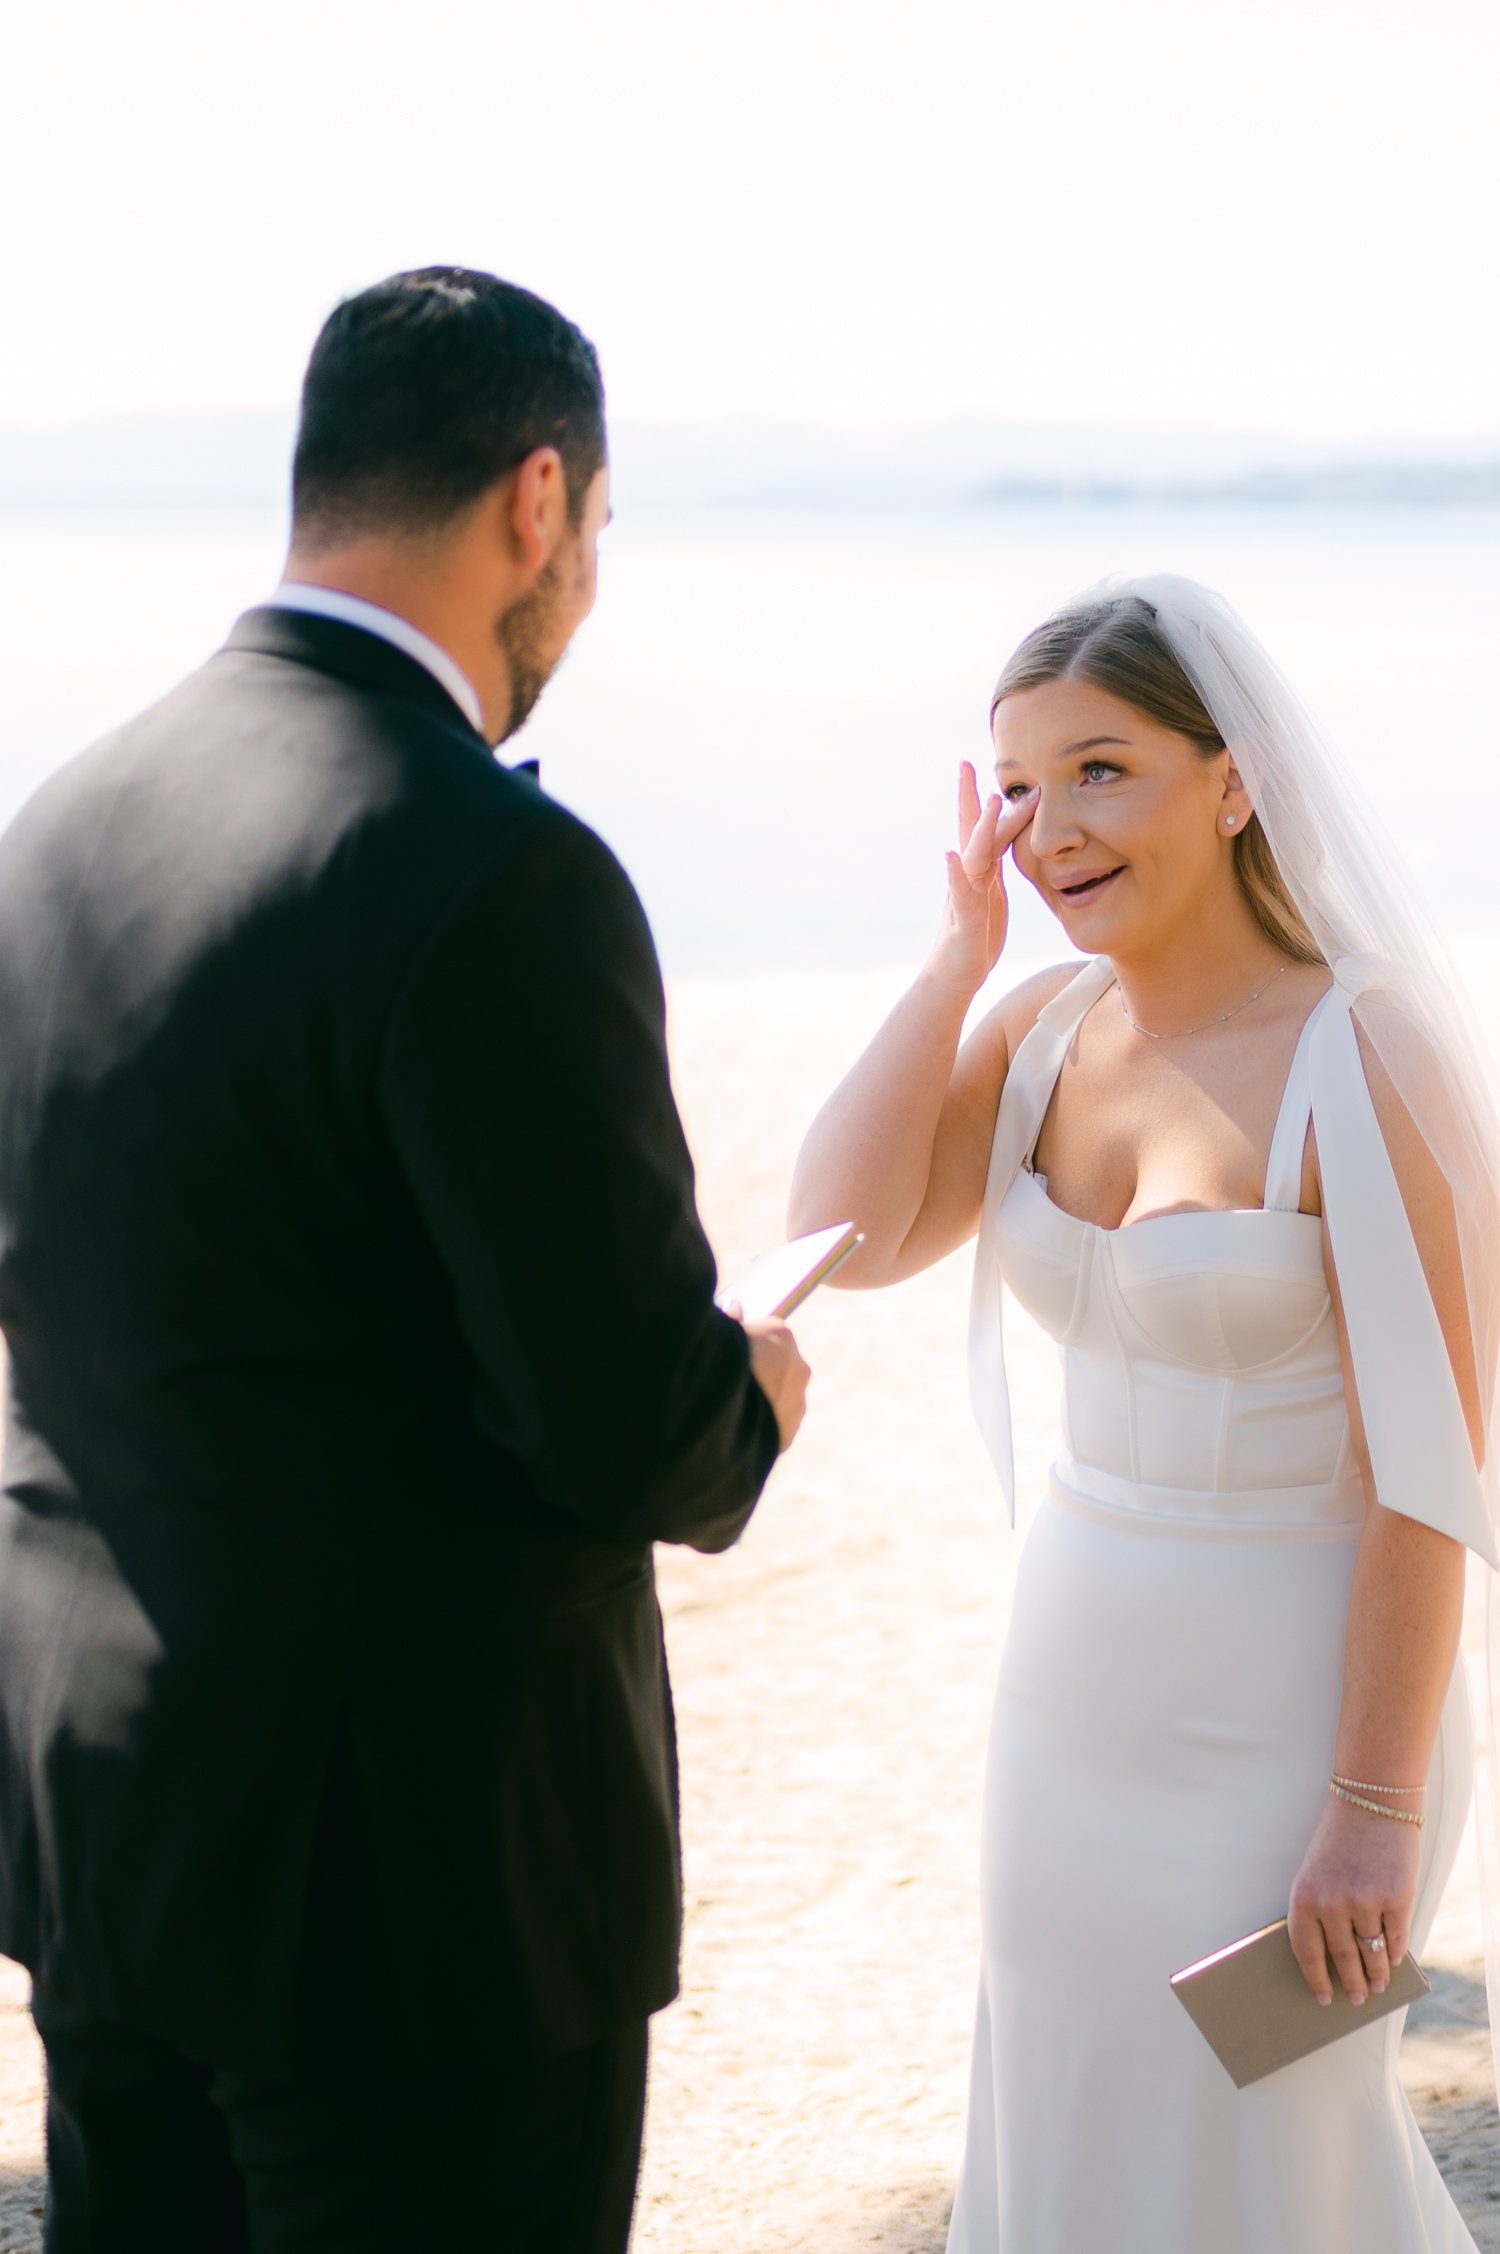 Hyatt Lake Tahoe wedding, photo of couple having a private vow reading